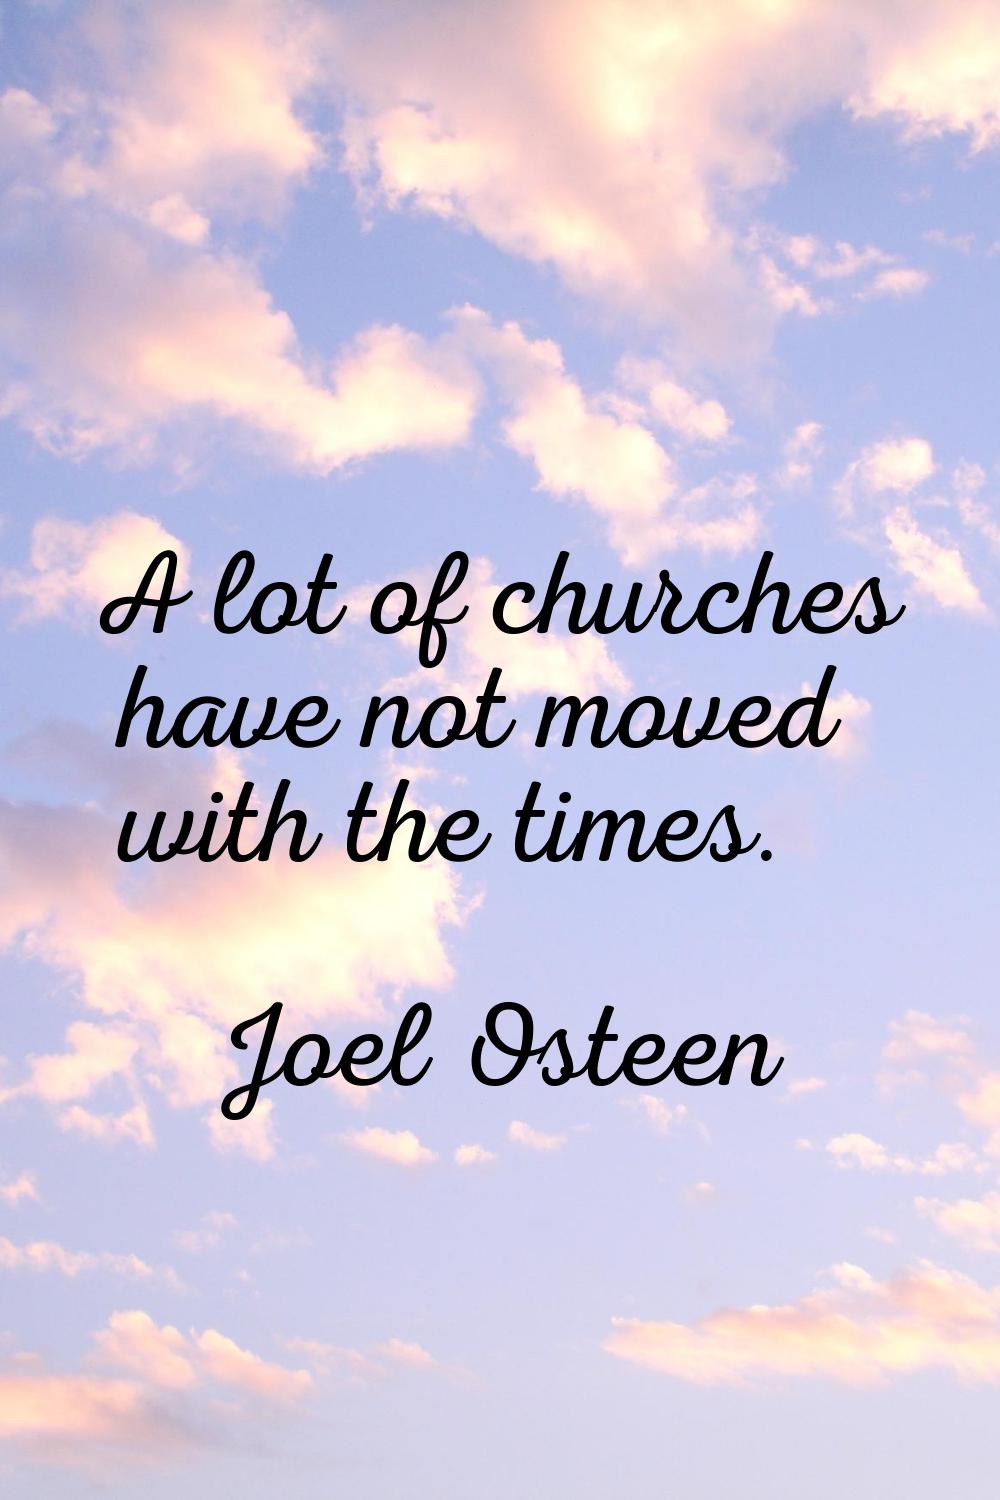 A lot of churches have not moved with the times.